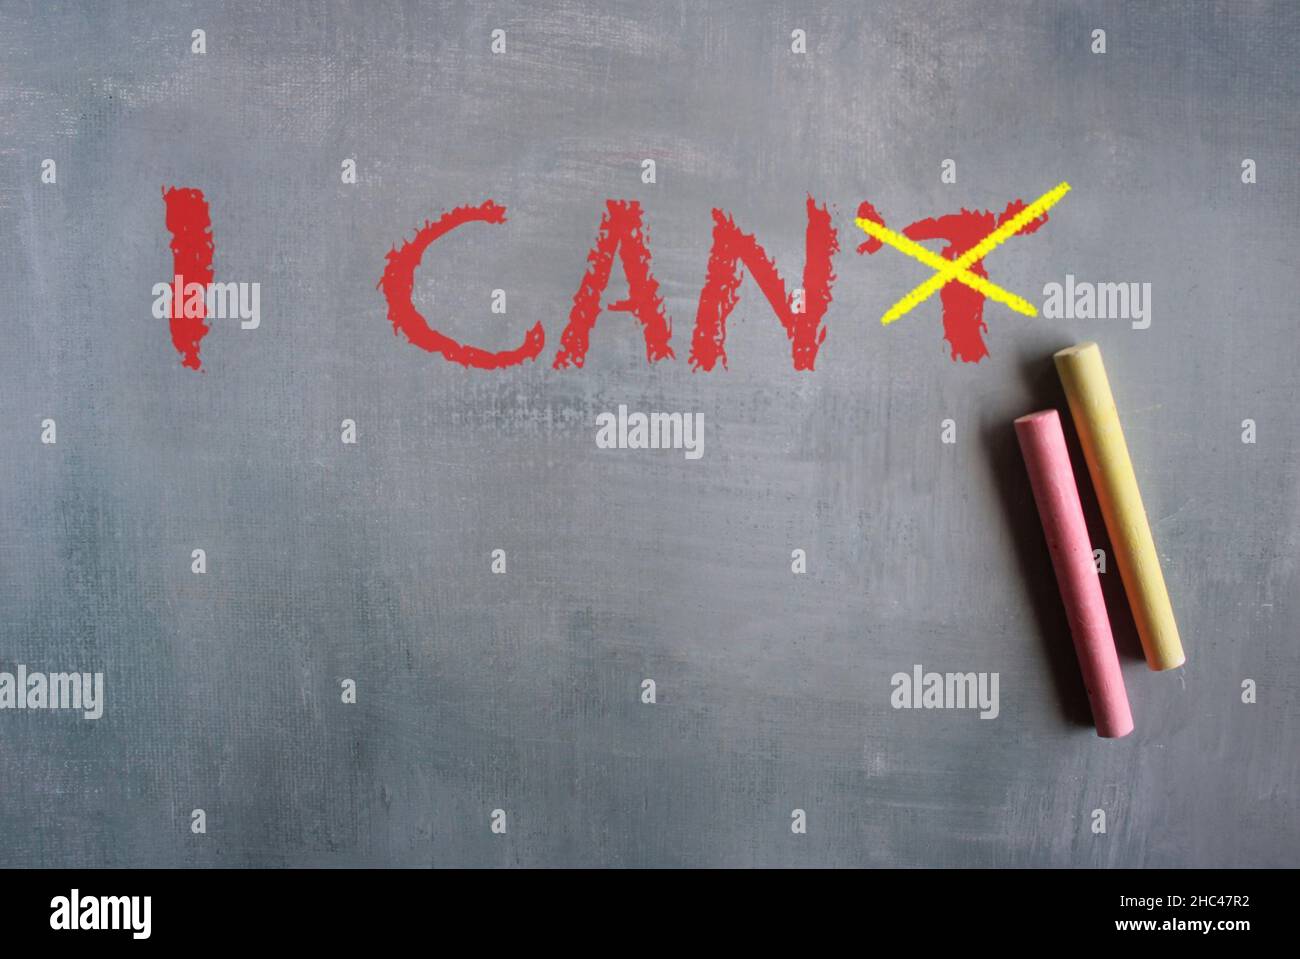 Motivation and inspiration concept. Word I CAN'T change to I CAN. Stock Photo